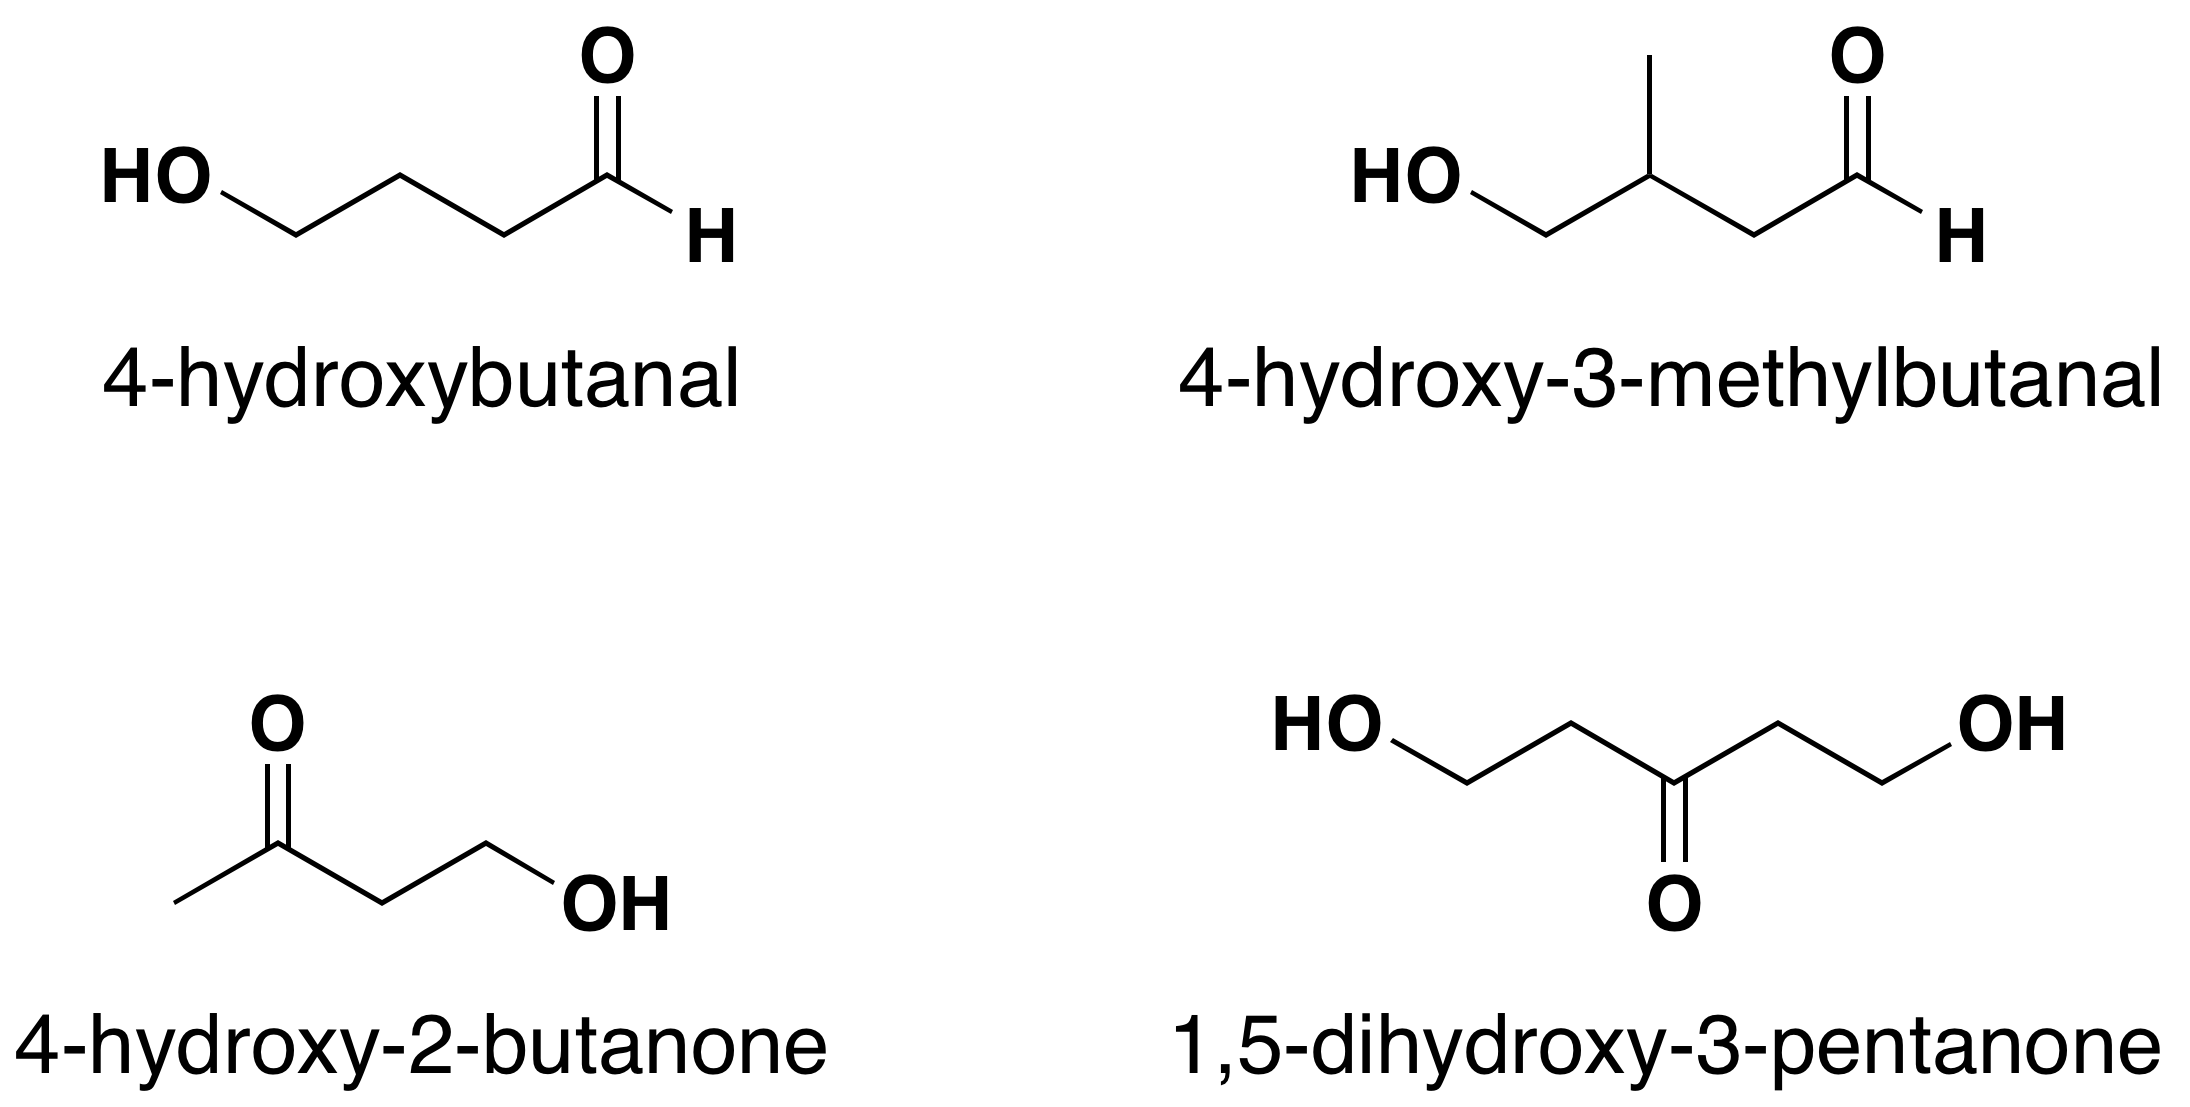 4 chemical structures of aldehydes and ketones. Top left to right: 4-hydroxylbutanal and 4-hydroxyl-2-methylbutanal. Bottom left to right: 4-hydroxy-2-butanone and 1,5-dihydroxy-3-pentanone.